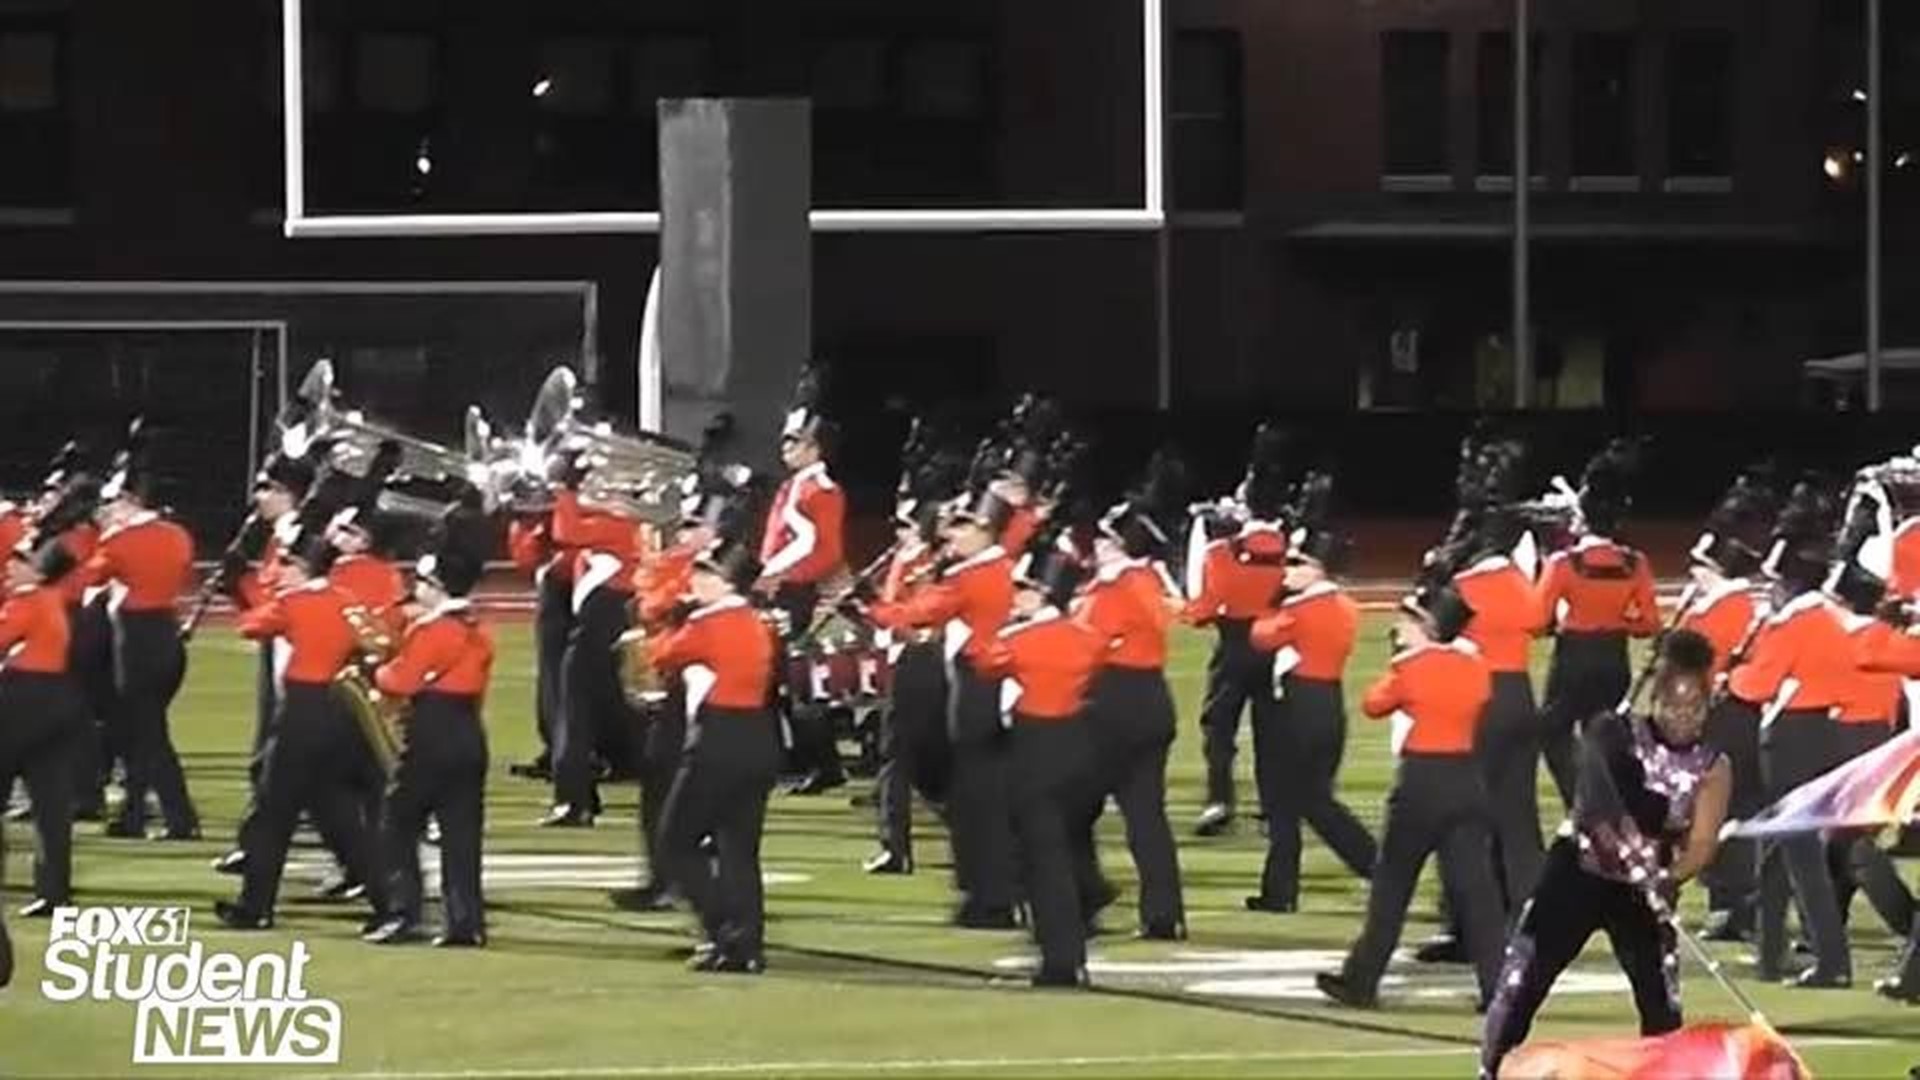 FOX61 Student News: Marching Bands Take To The Field